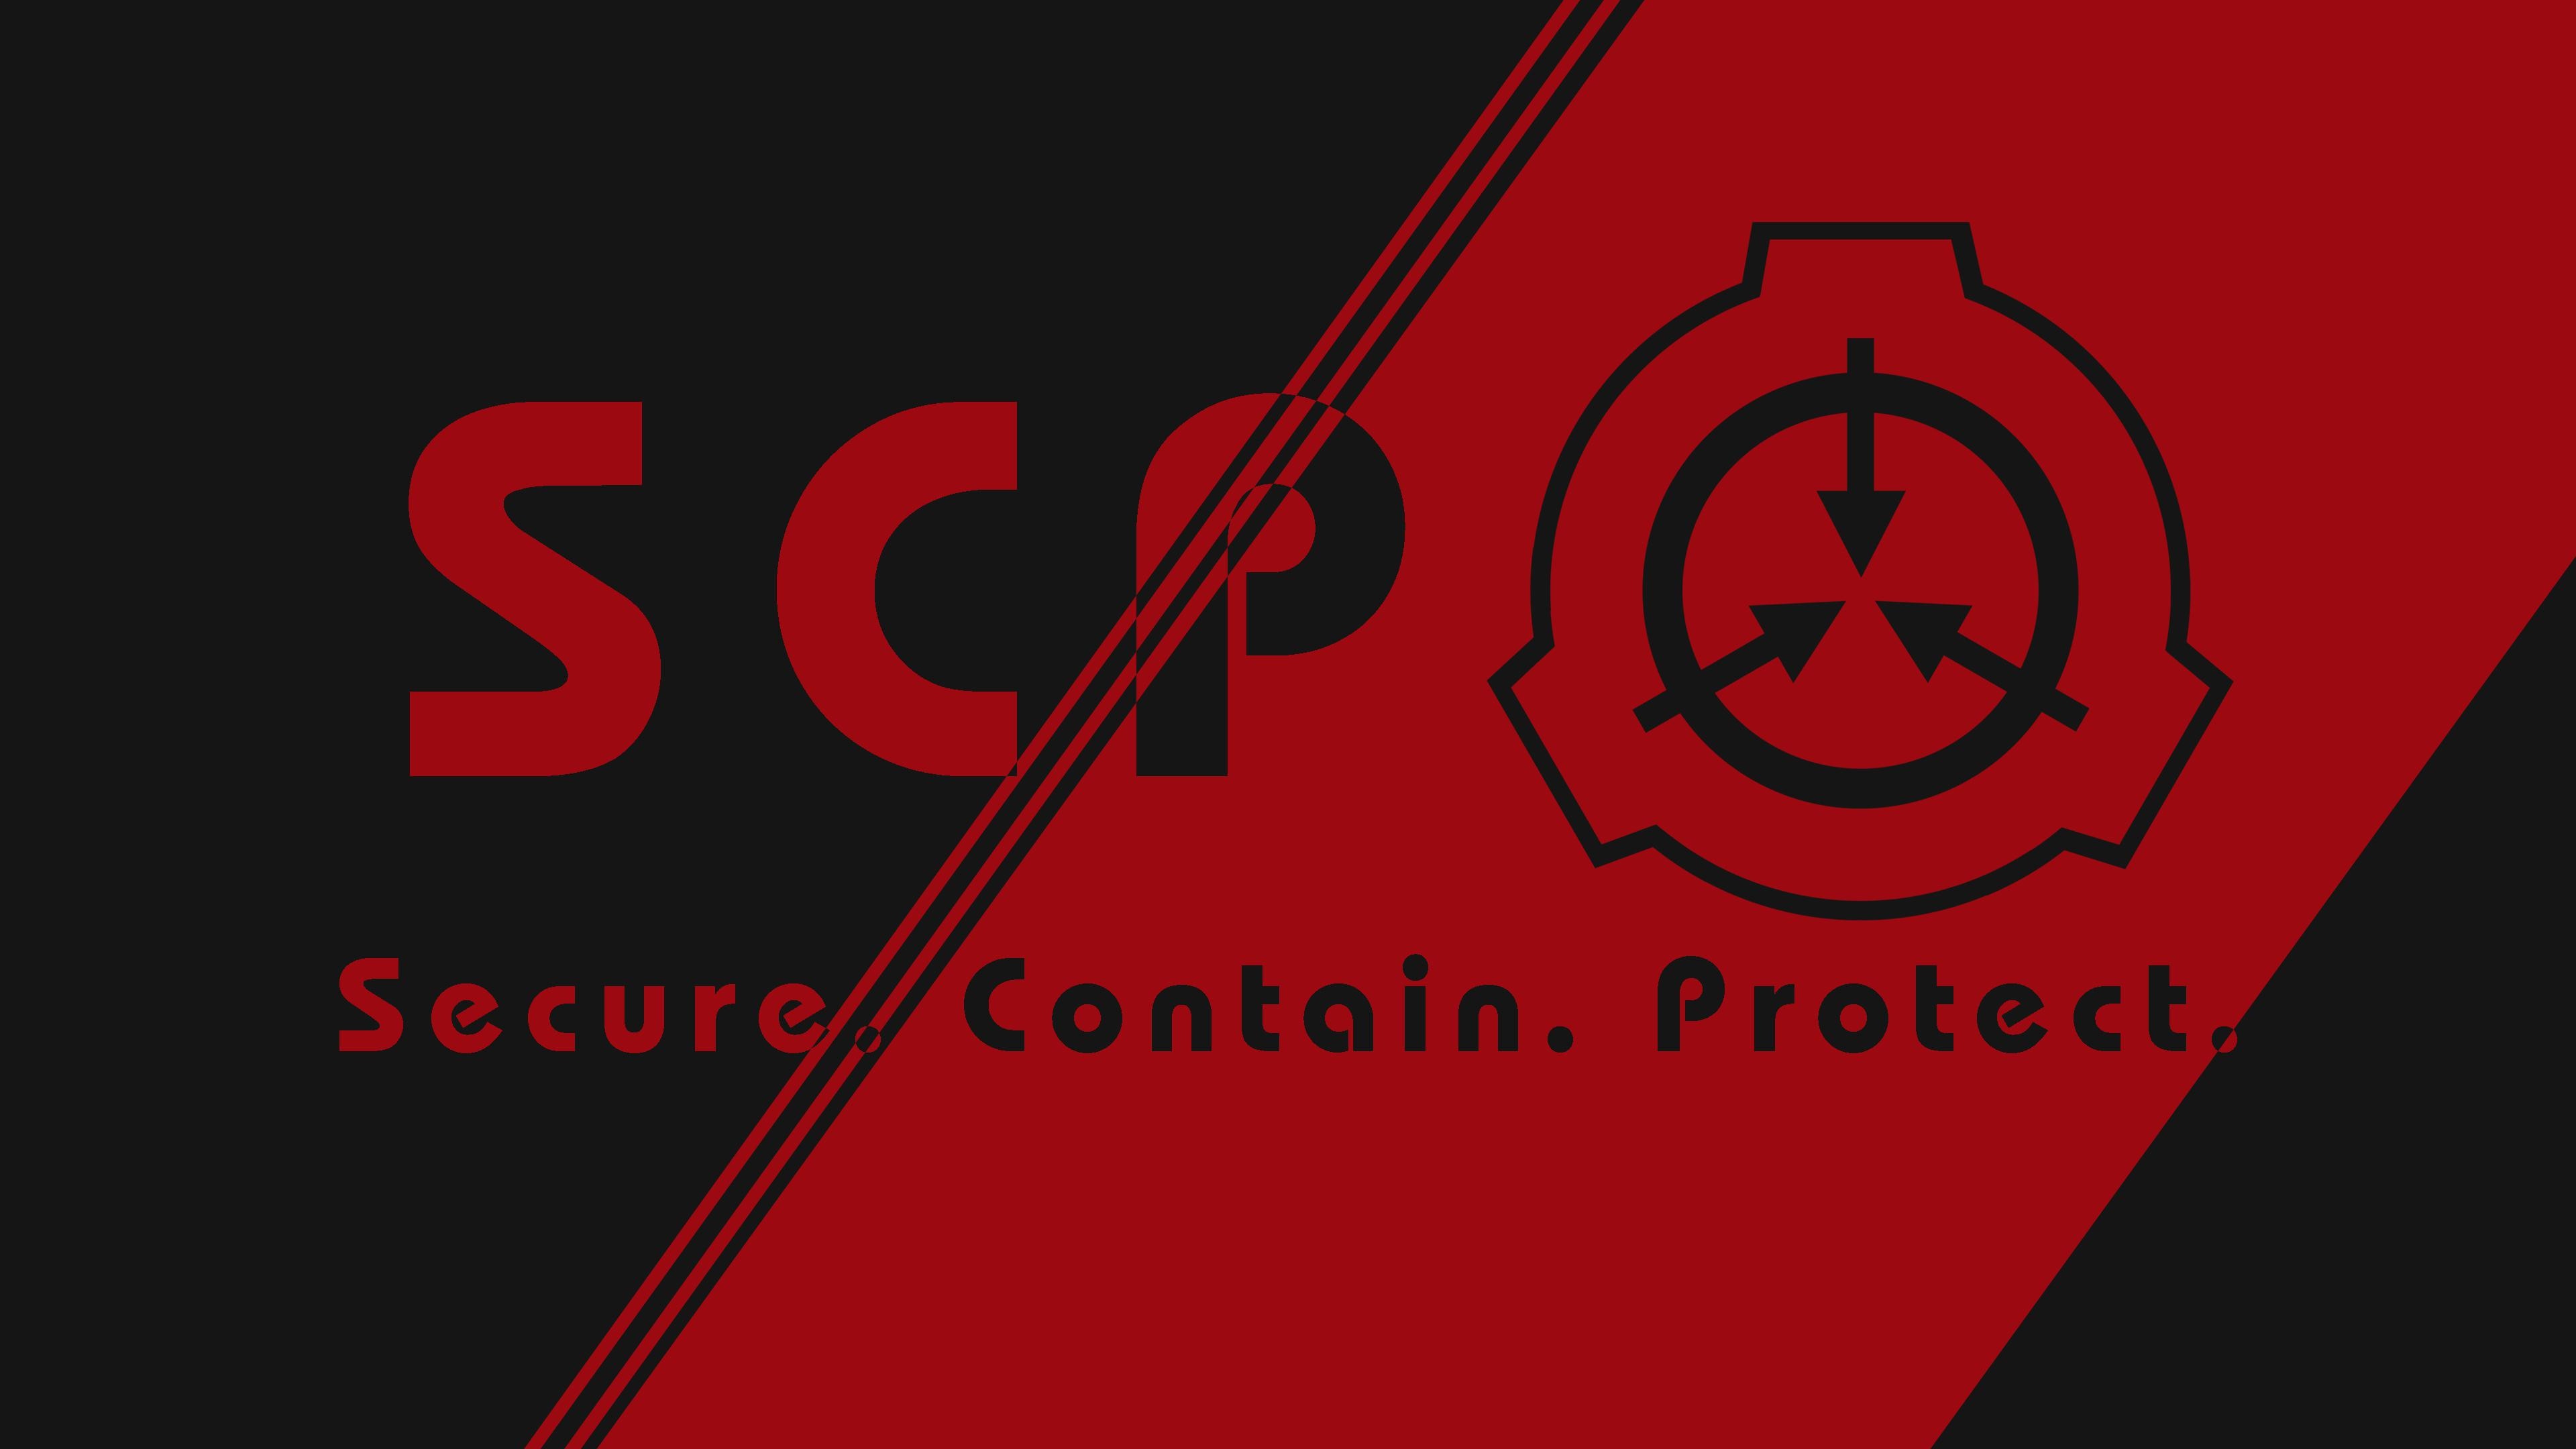 How to breach scp 079 in scp roleplay 